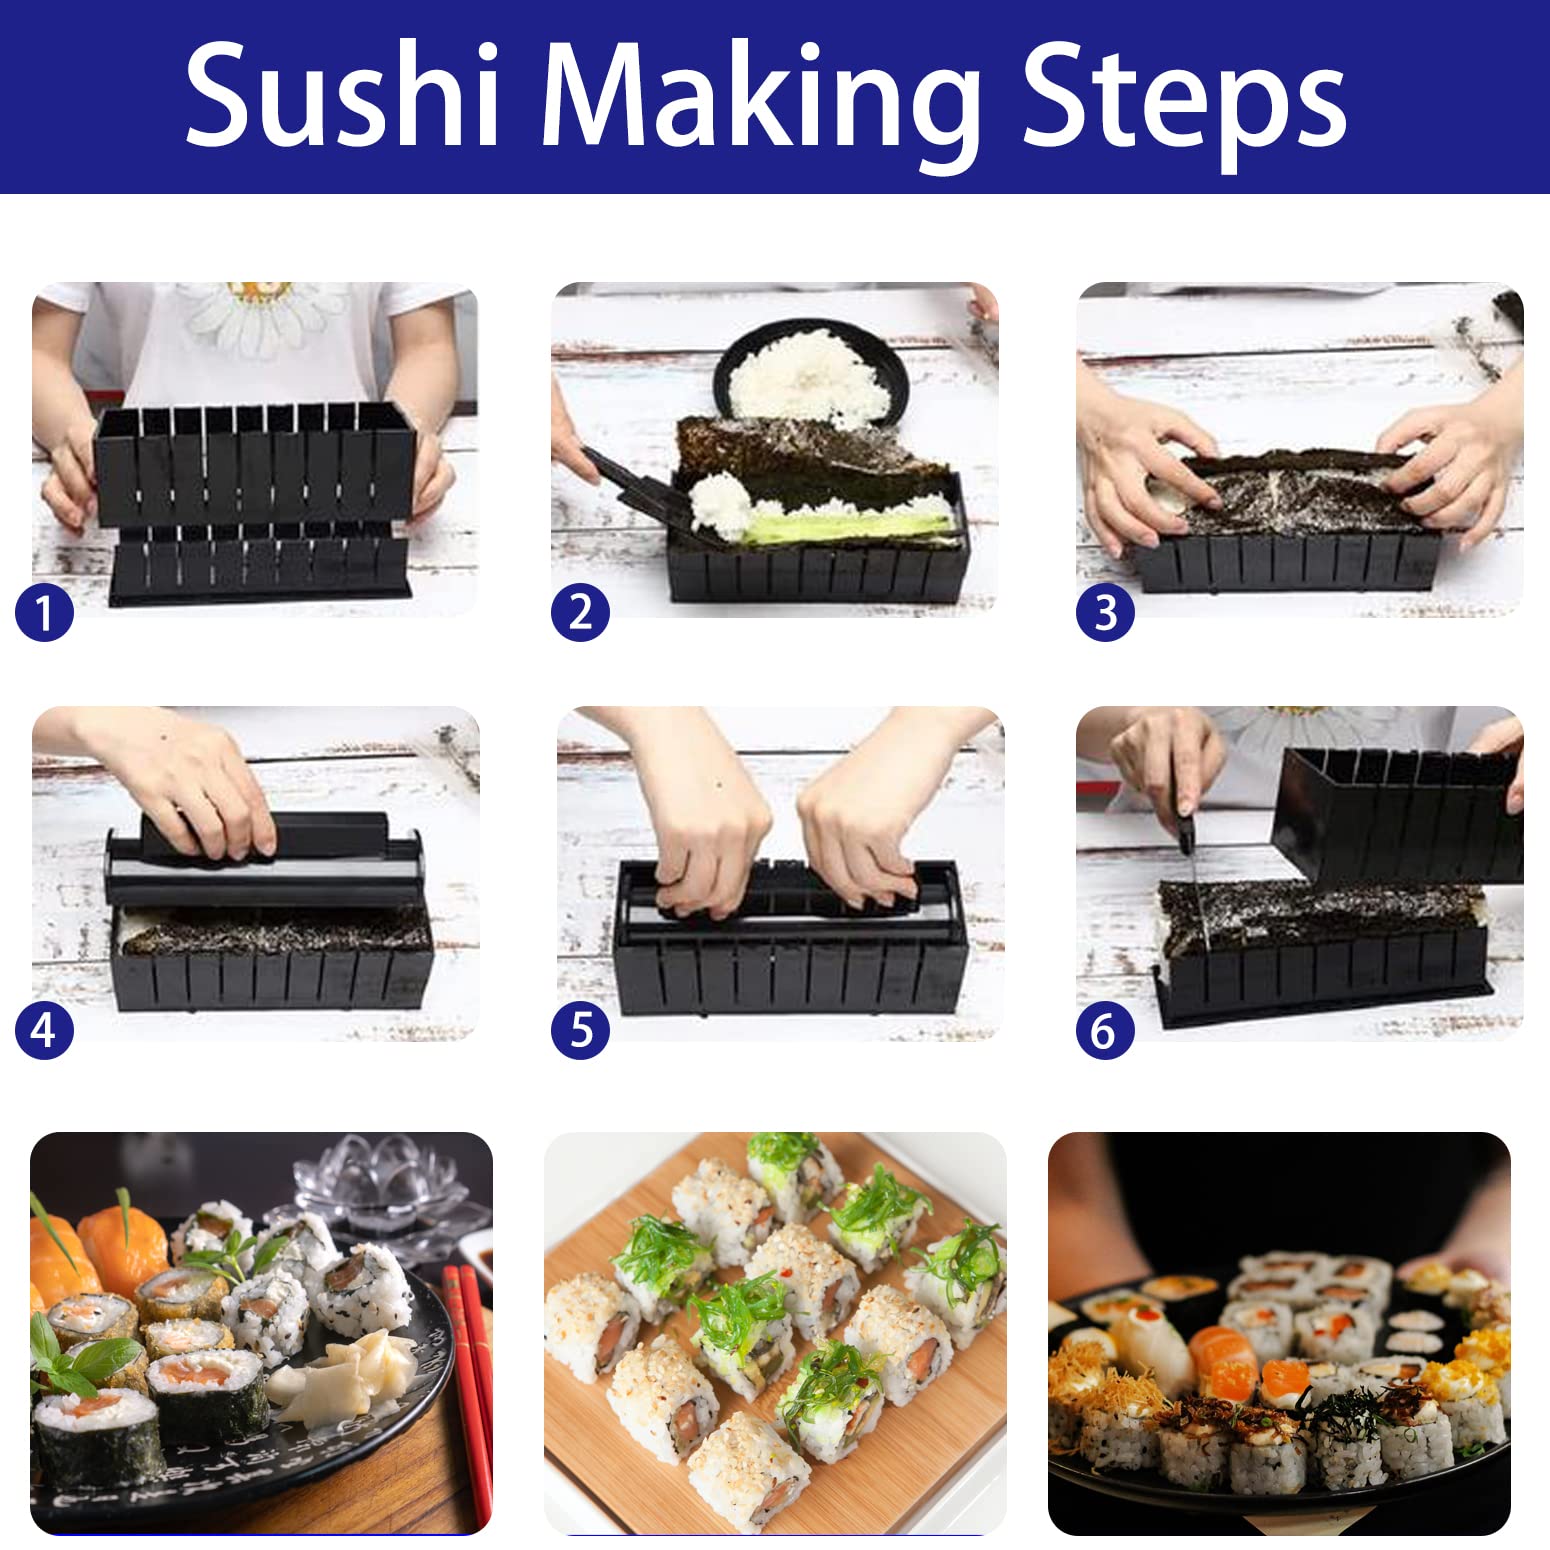 ELEDUCTMON Sushi Making Kit for Beginners - Original Sushi Maker Deluxe Exclusive Online Video Tutorials Complete with Sushi Knife 11 Piece DIY Sushi Set - Easy and Fun - Sushi Rolls - Maki Rolls